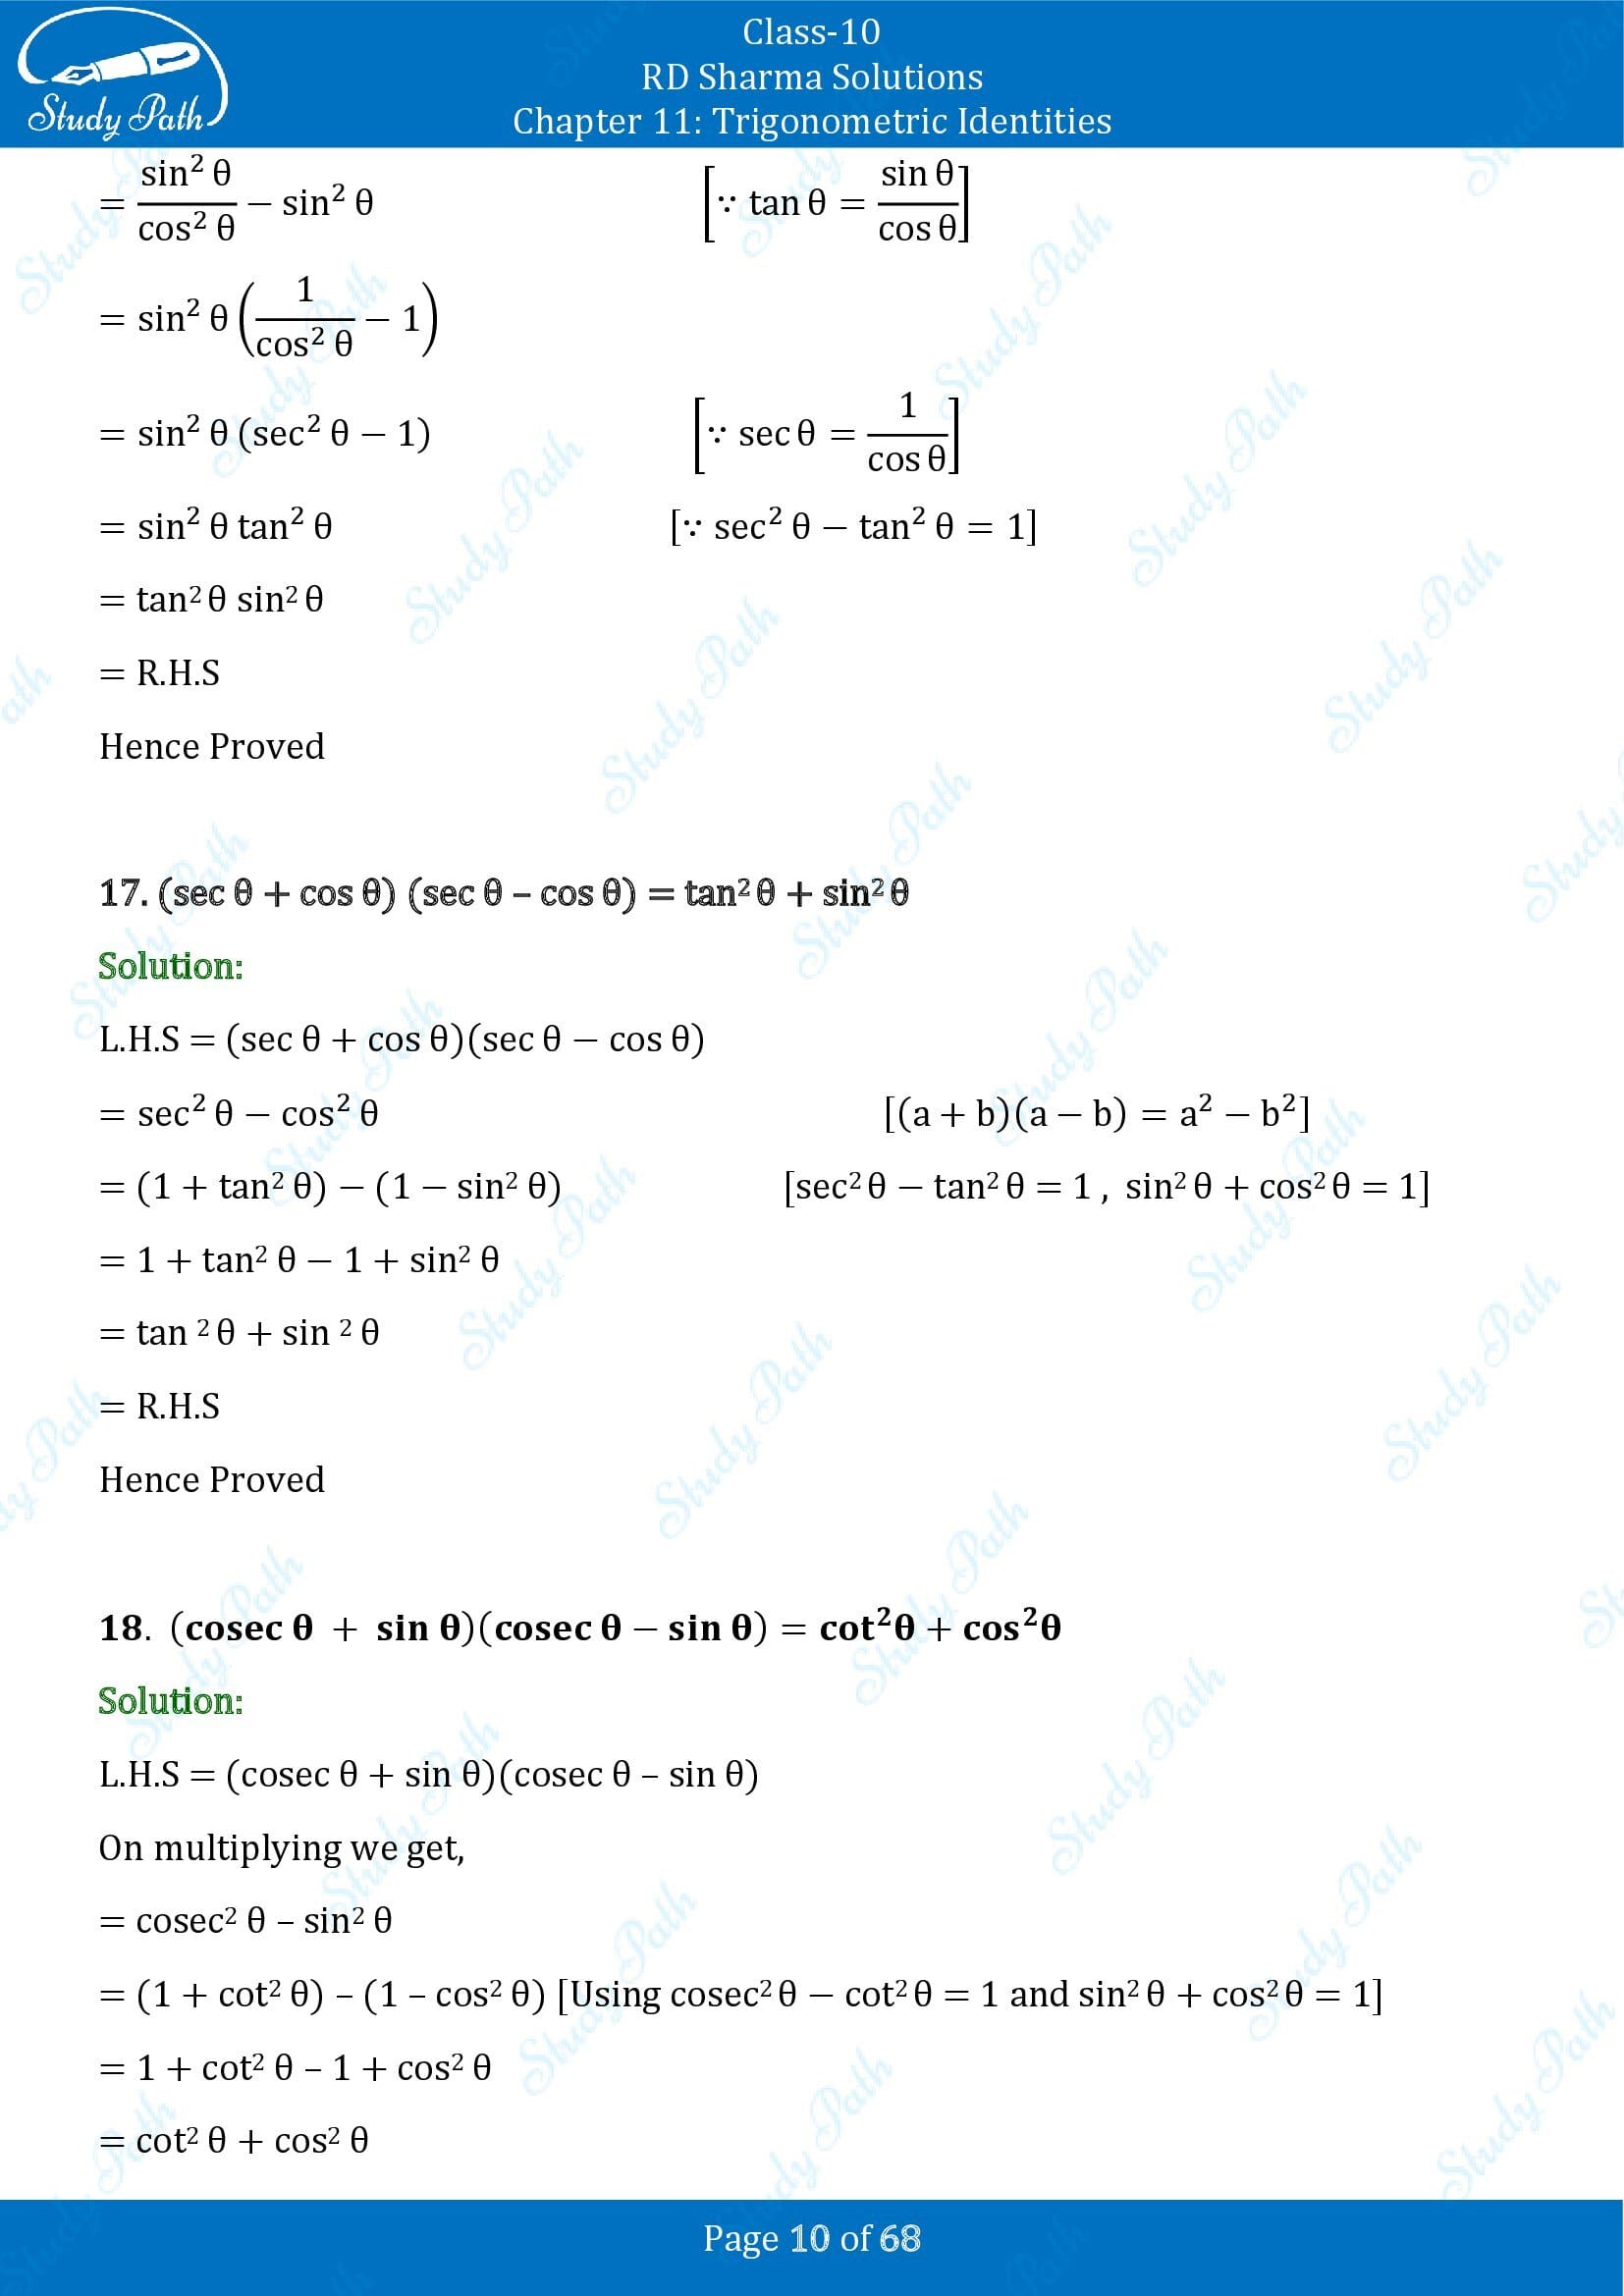 RD Sharma Solutions Class 10 Chapter 11 Trigonometric Identities Exercise 11.1 00010